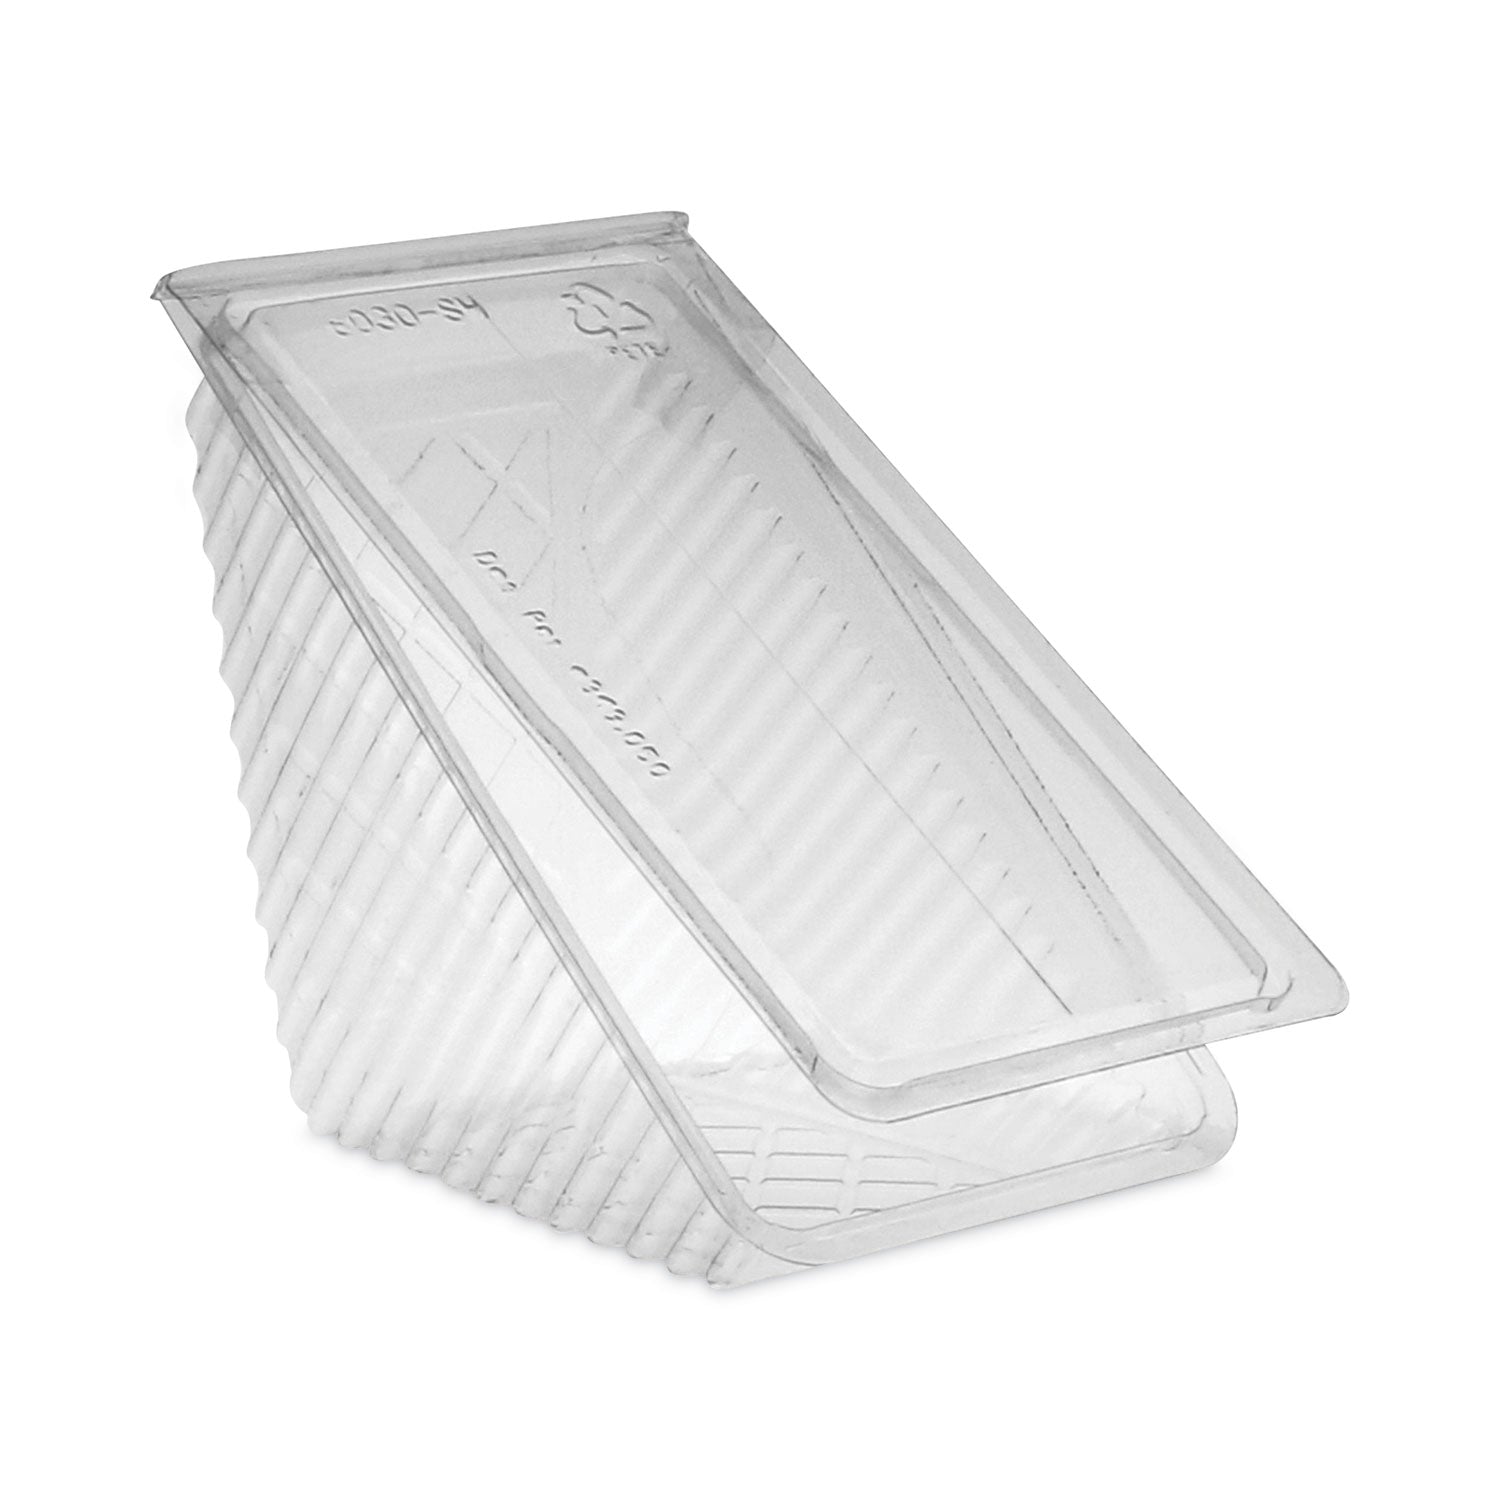 plastic-hinged-lid-sandwich-container-325-x-65-x-3-clear-85-pack-3-packs-carton_pcty11334 - 2